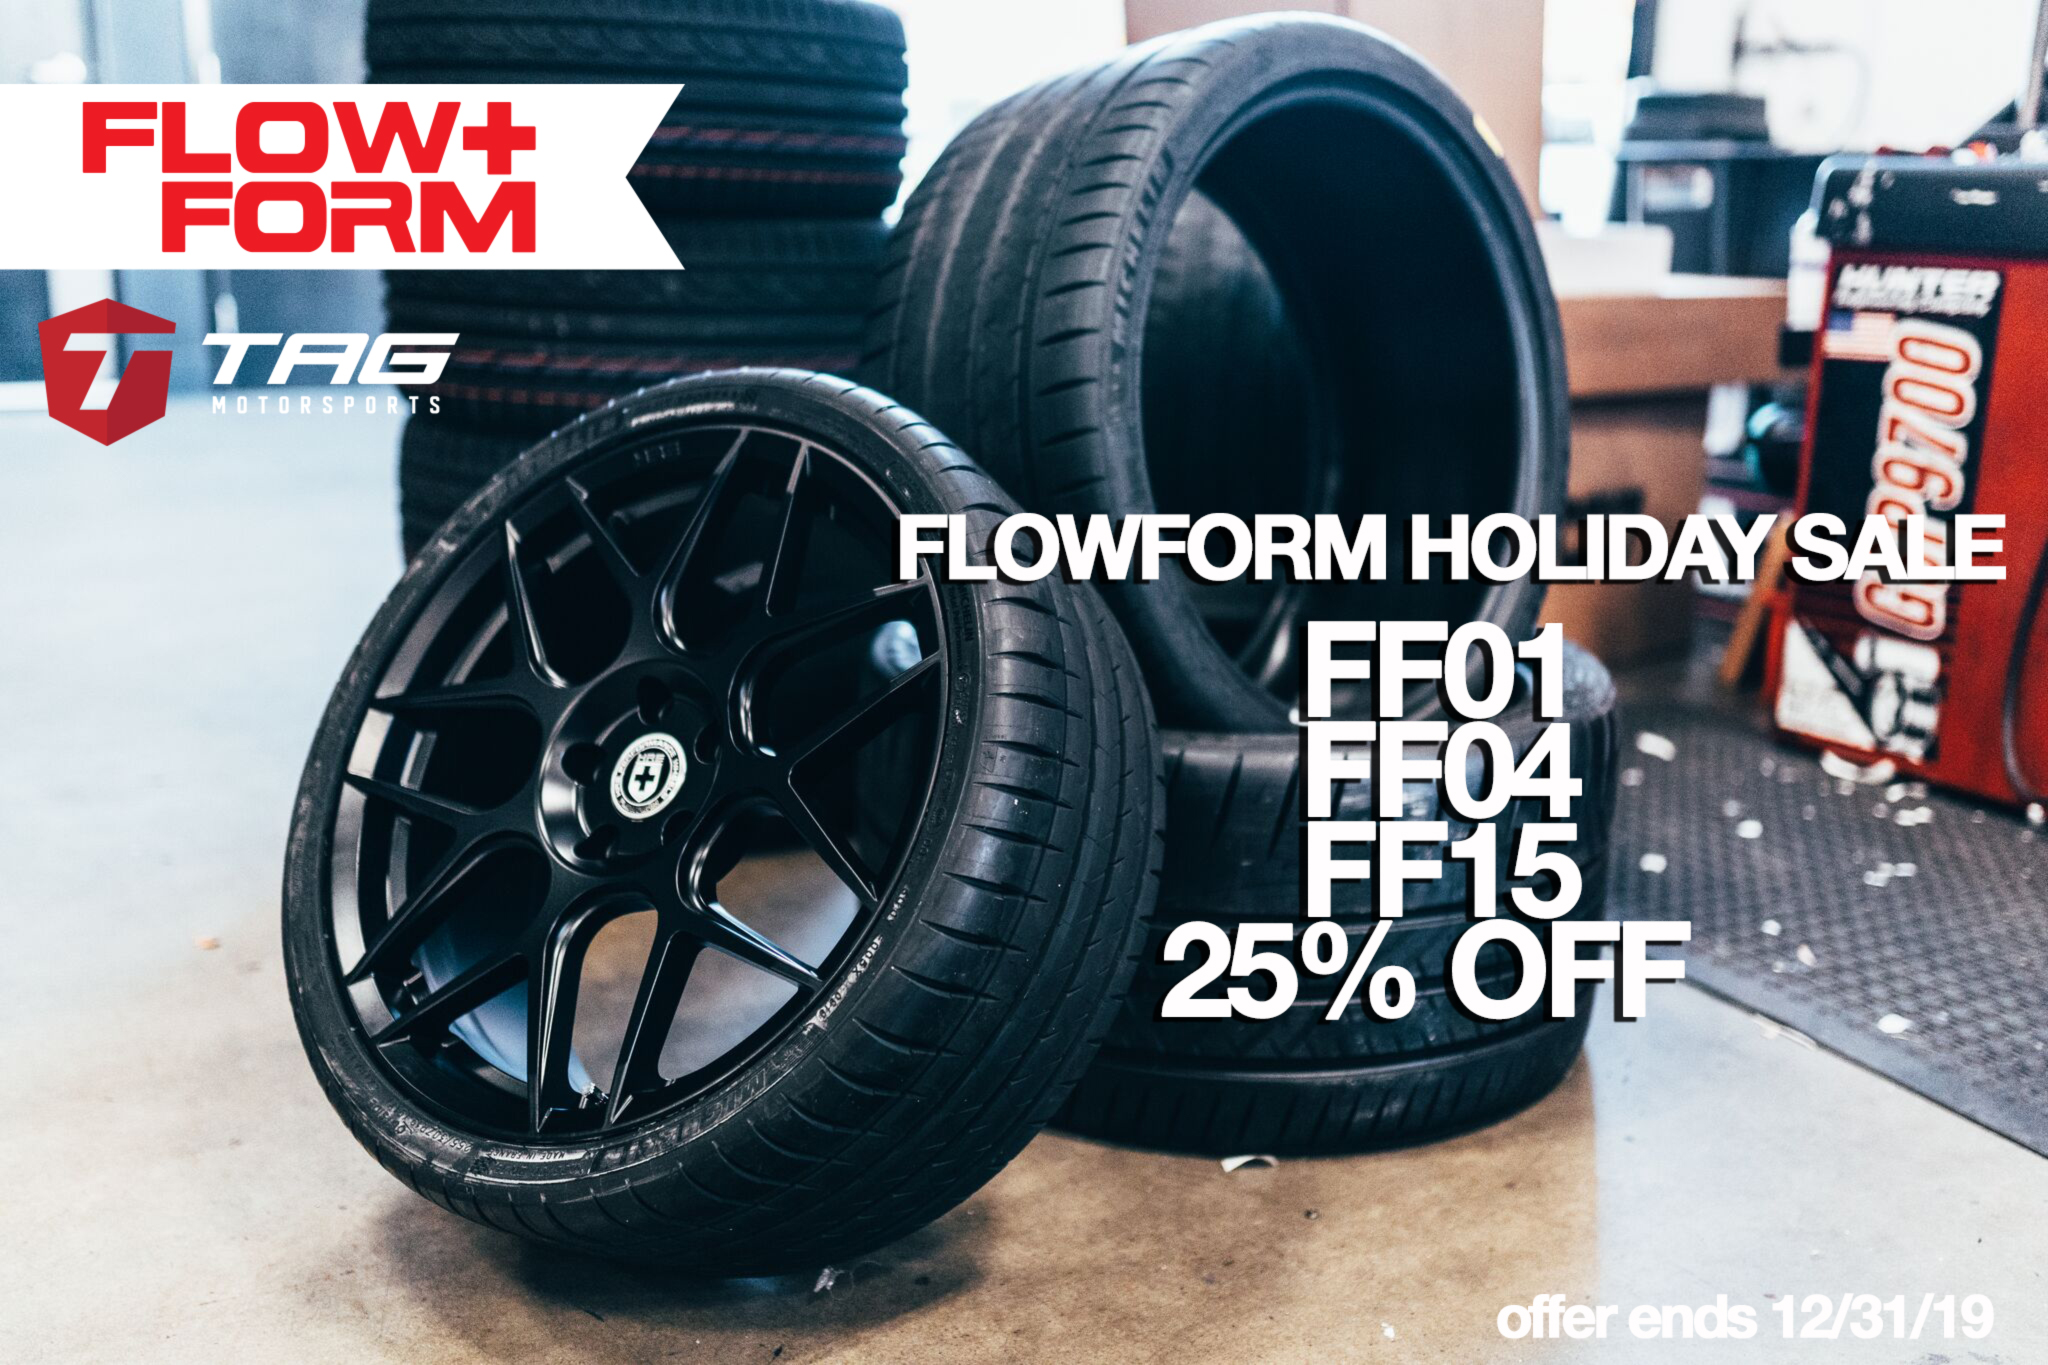 HRE FLOW FORM SALE HOLIDAY 2019!!